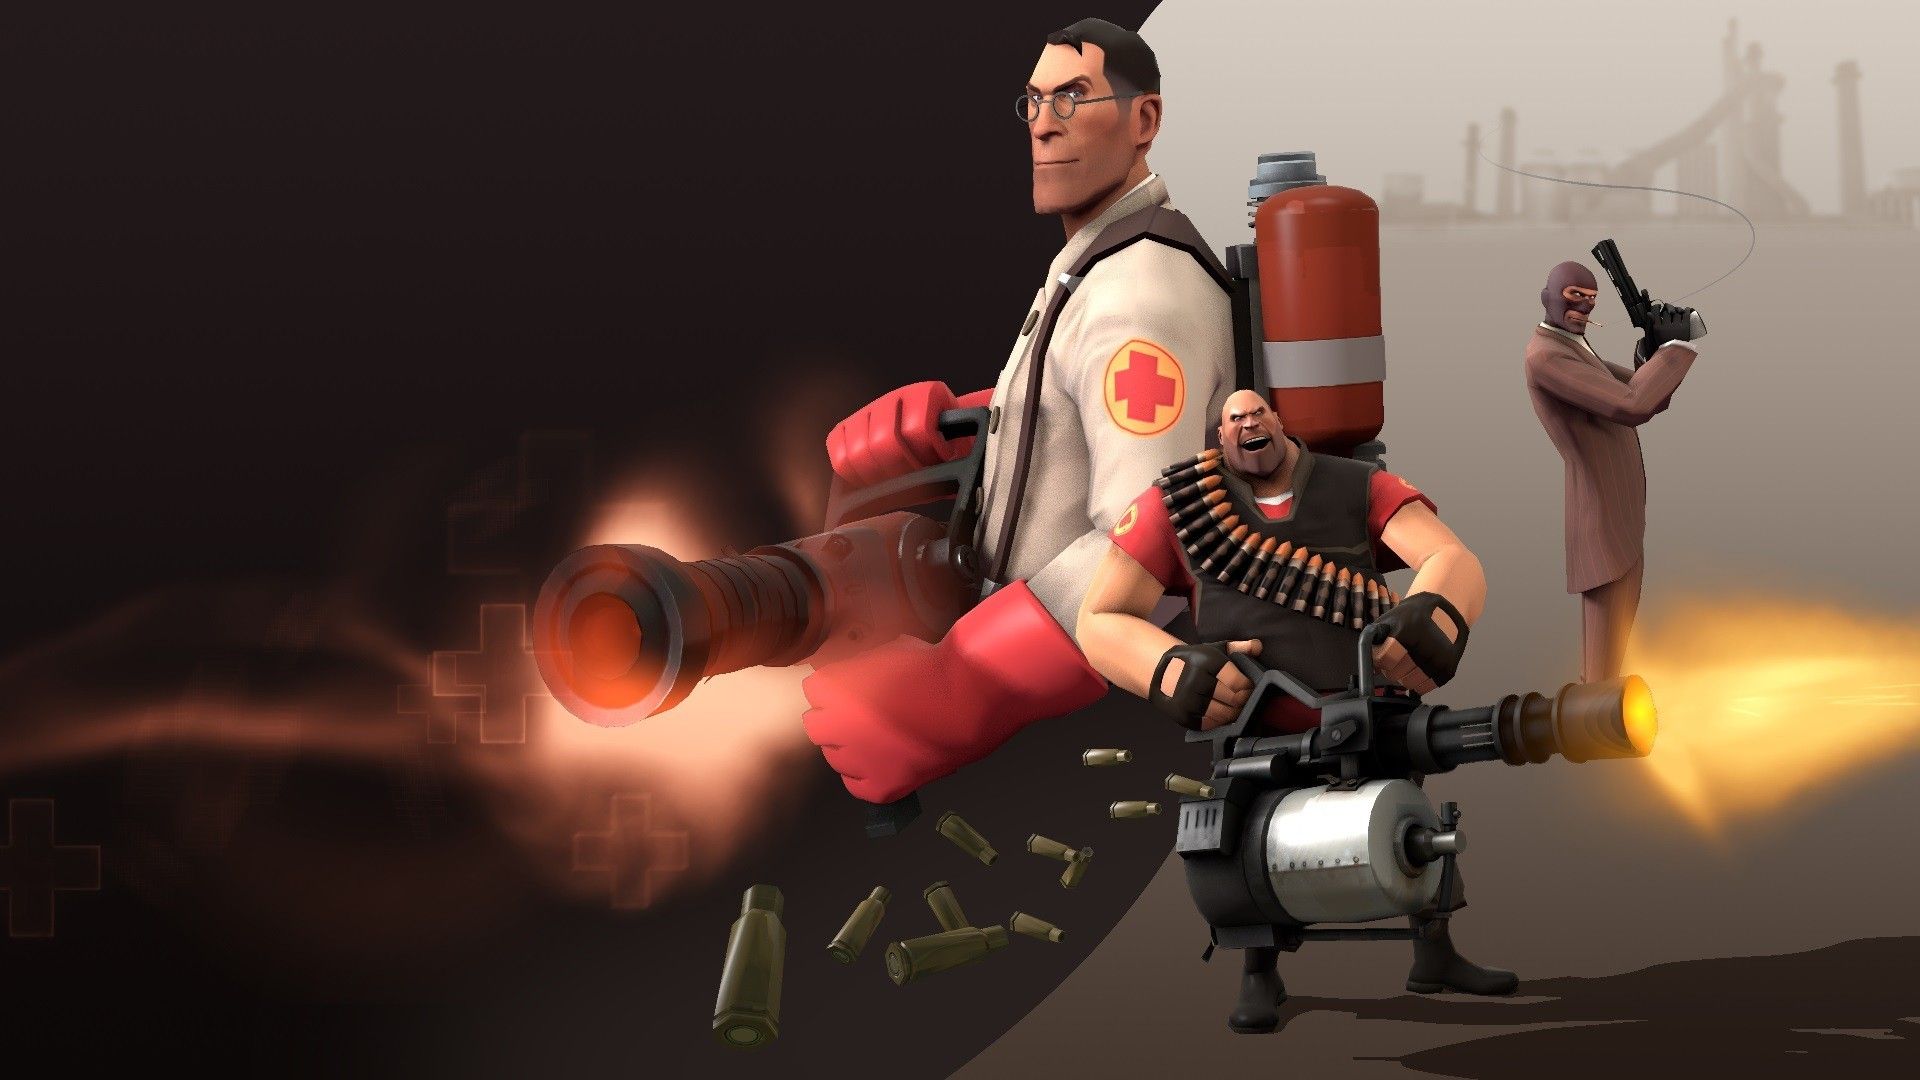 Tf2 avatars for steam фото 53